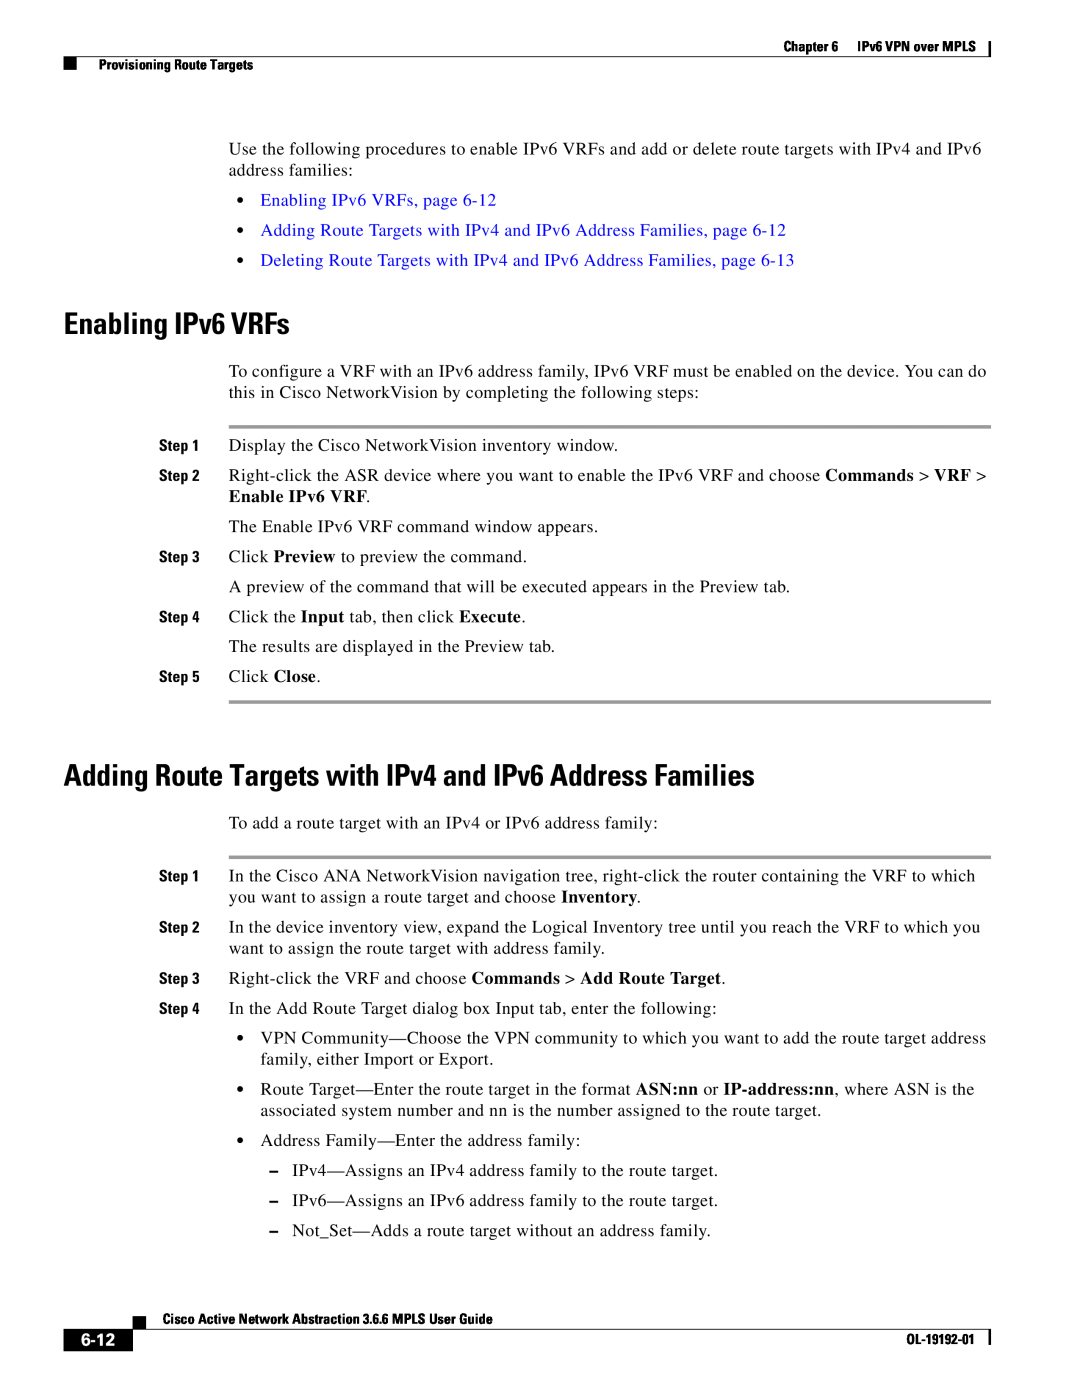 Cisco Systems 3.6.6 manual Adding Route Targets with IPv4 and IPv6 Address Families, Enabling IPv6 VRFs, page, 6-12 